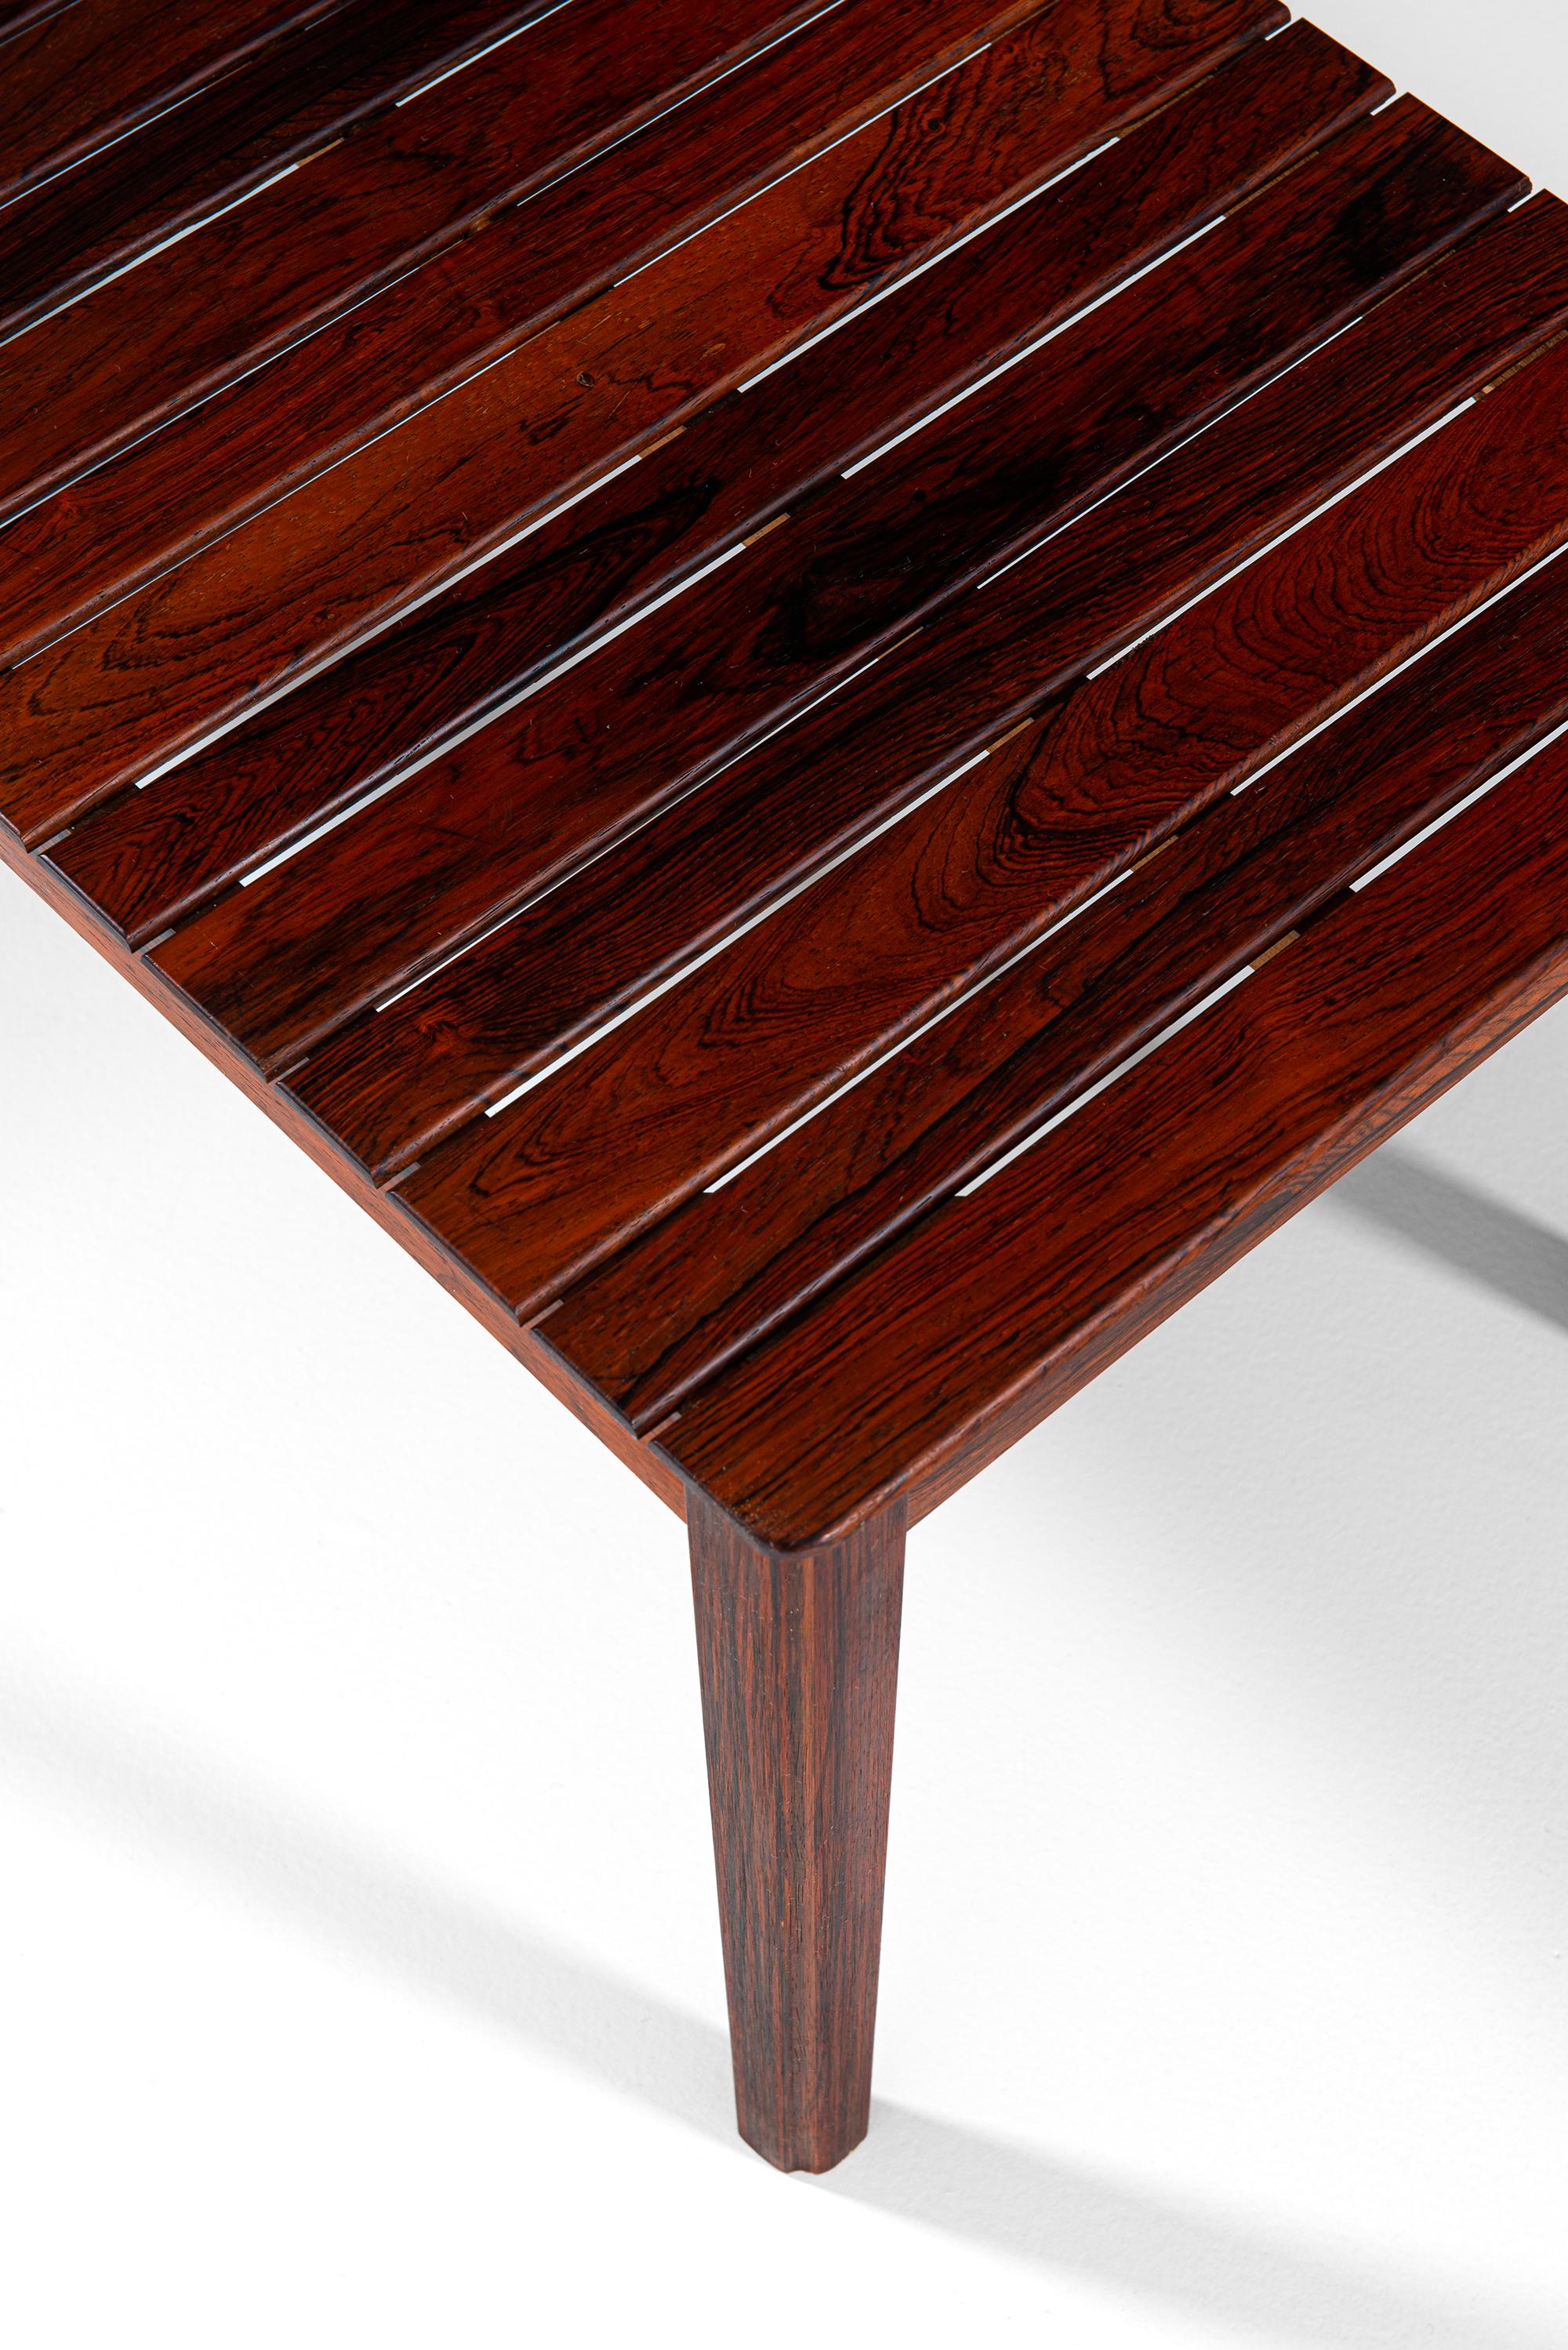 Mid-20th Century Side Table / Bench in Solid Rosewood Produced by Alberts in Tibro, Sweden